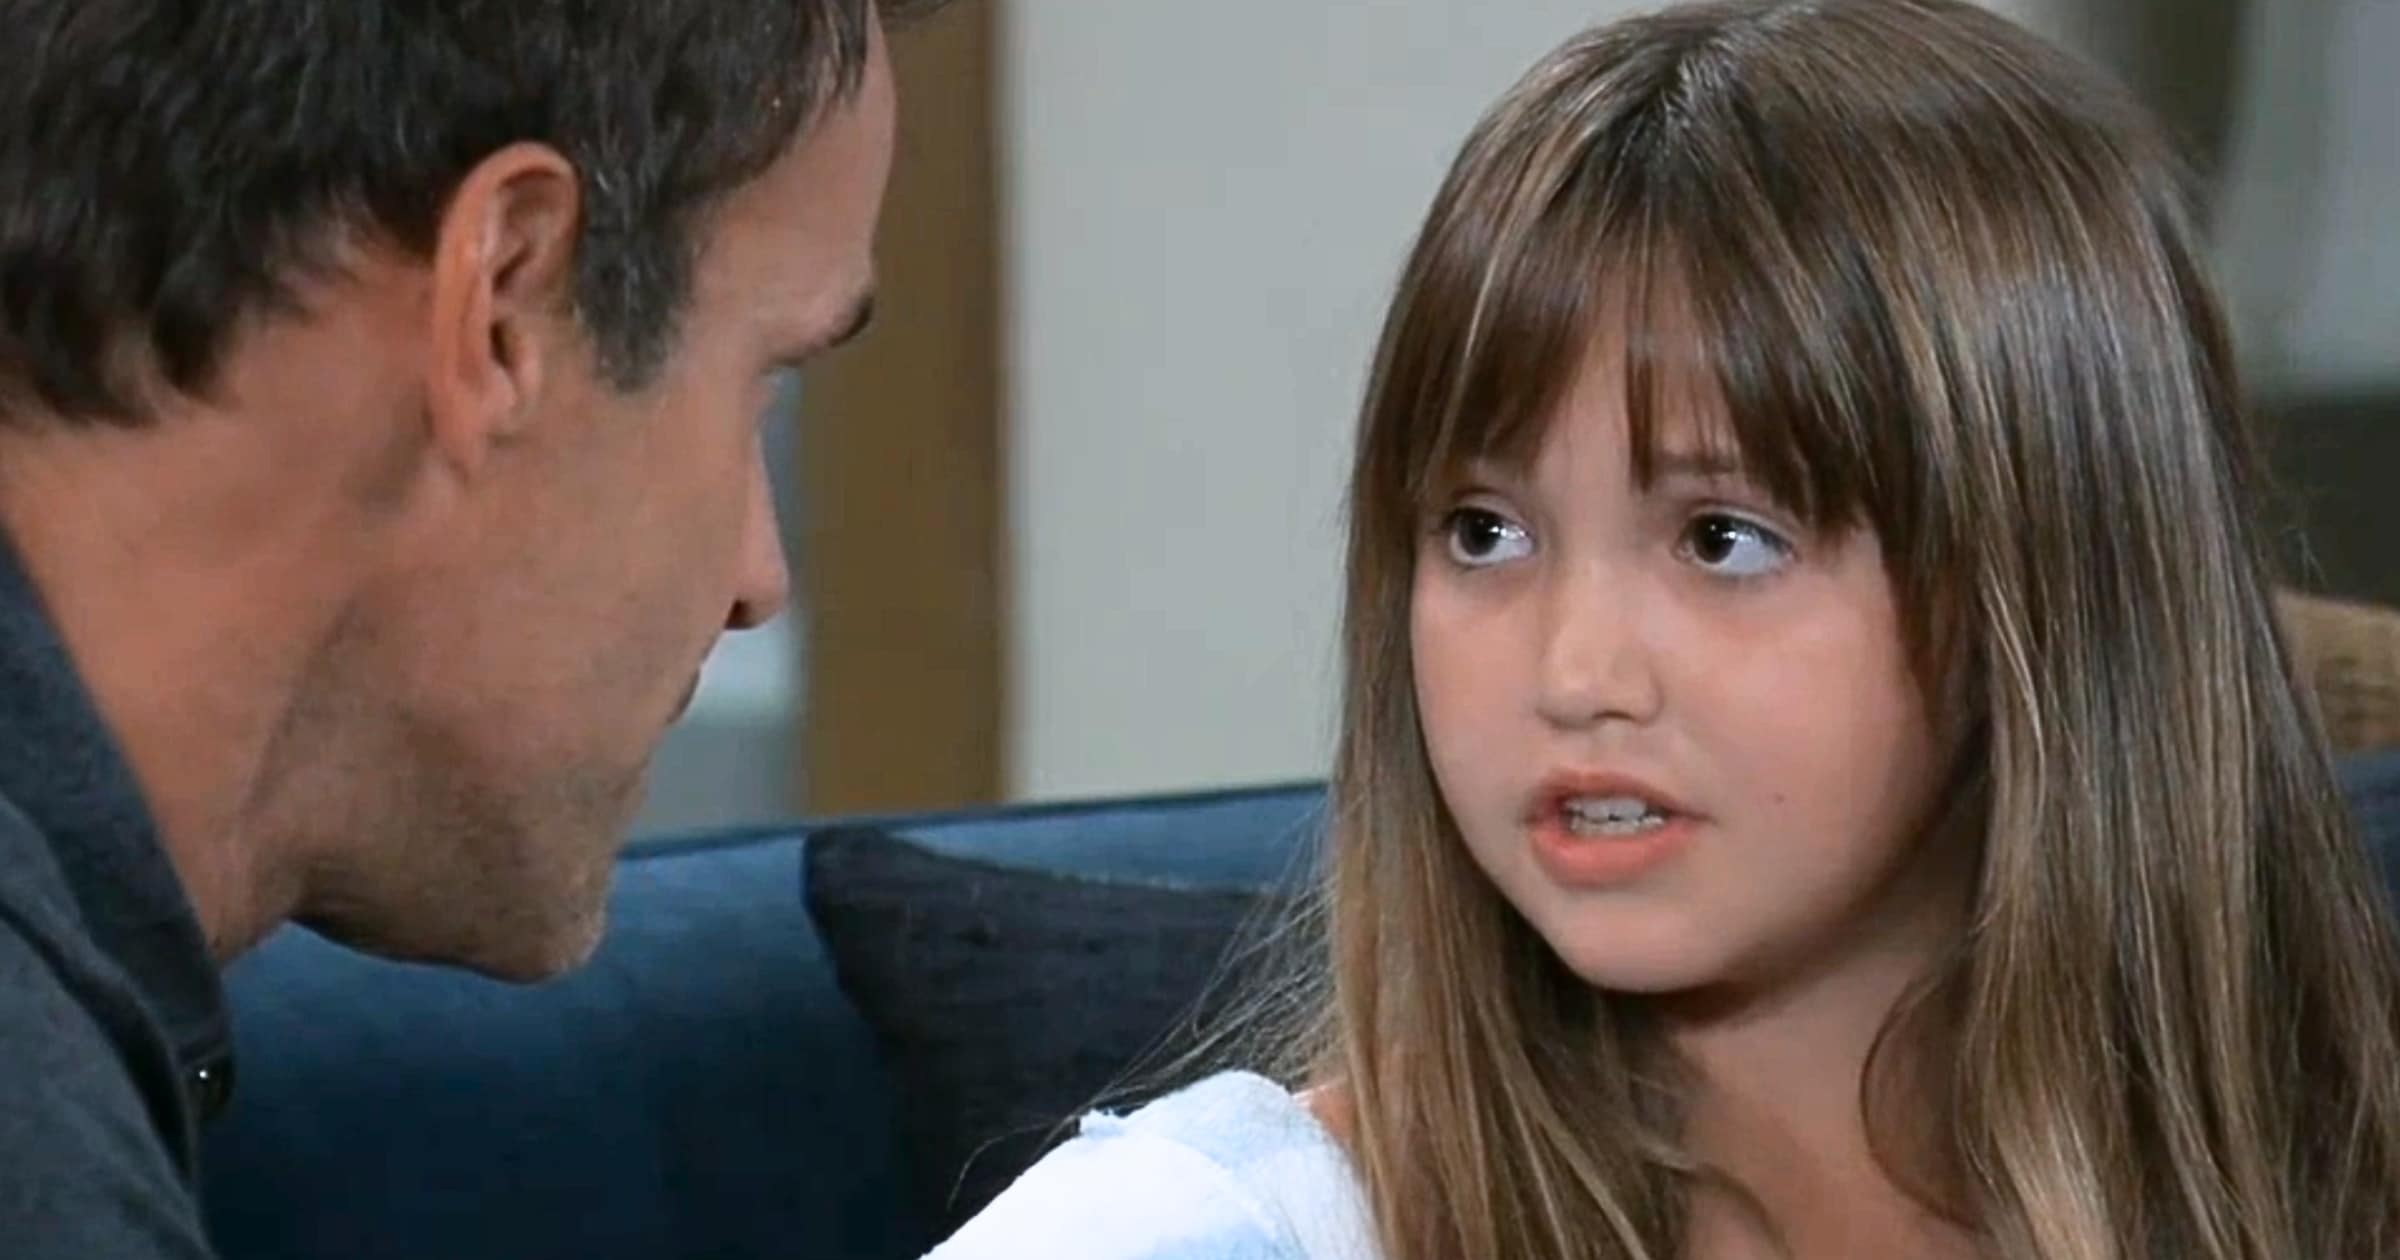 General Hospital - Nov 7 - Drew and Scout